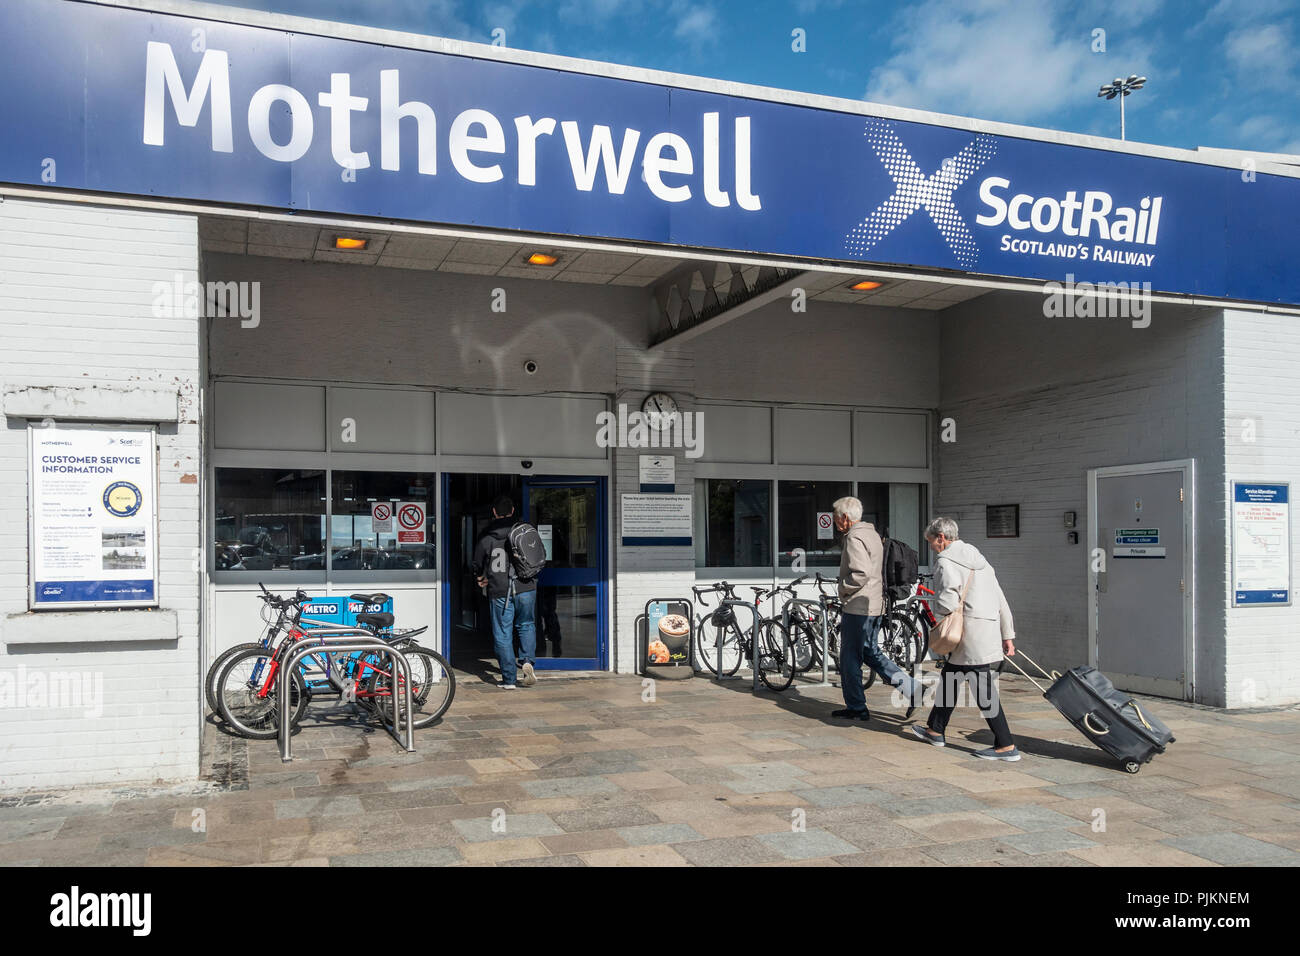 Passengers entering Motherwell ScotRail railway station. Two men with rucksacks, one woman pulling a suitcase on wheels. Bicycle racks. North Lanarksh Stock Photo